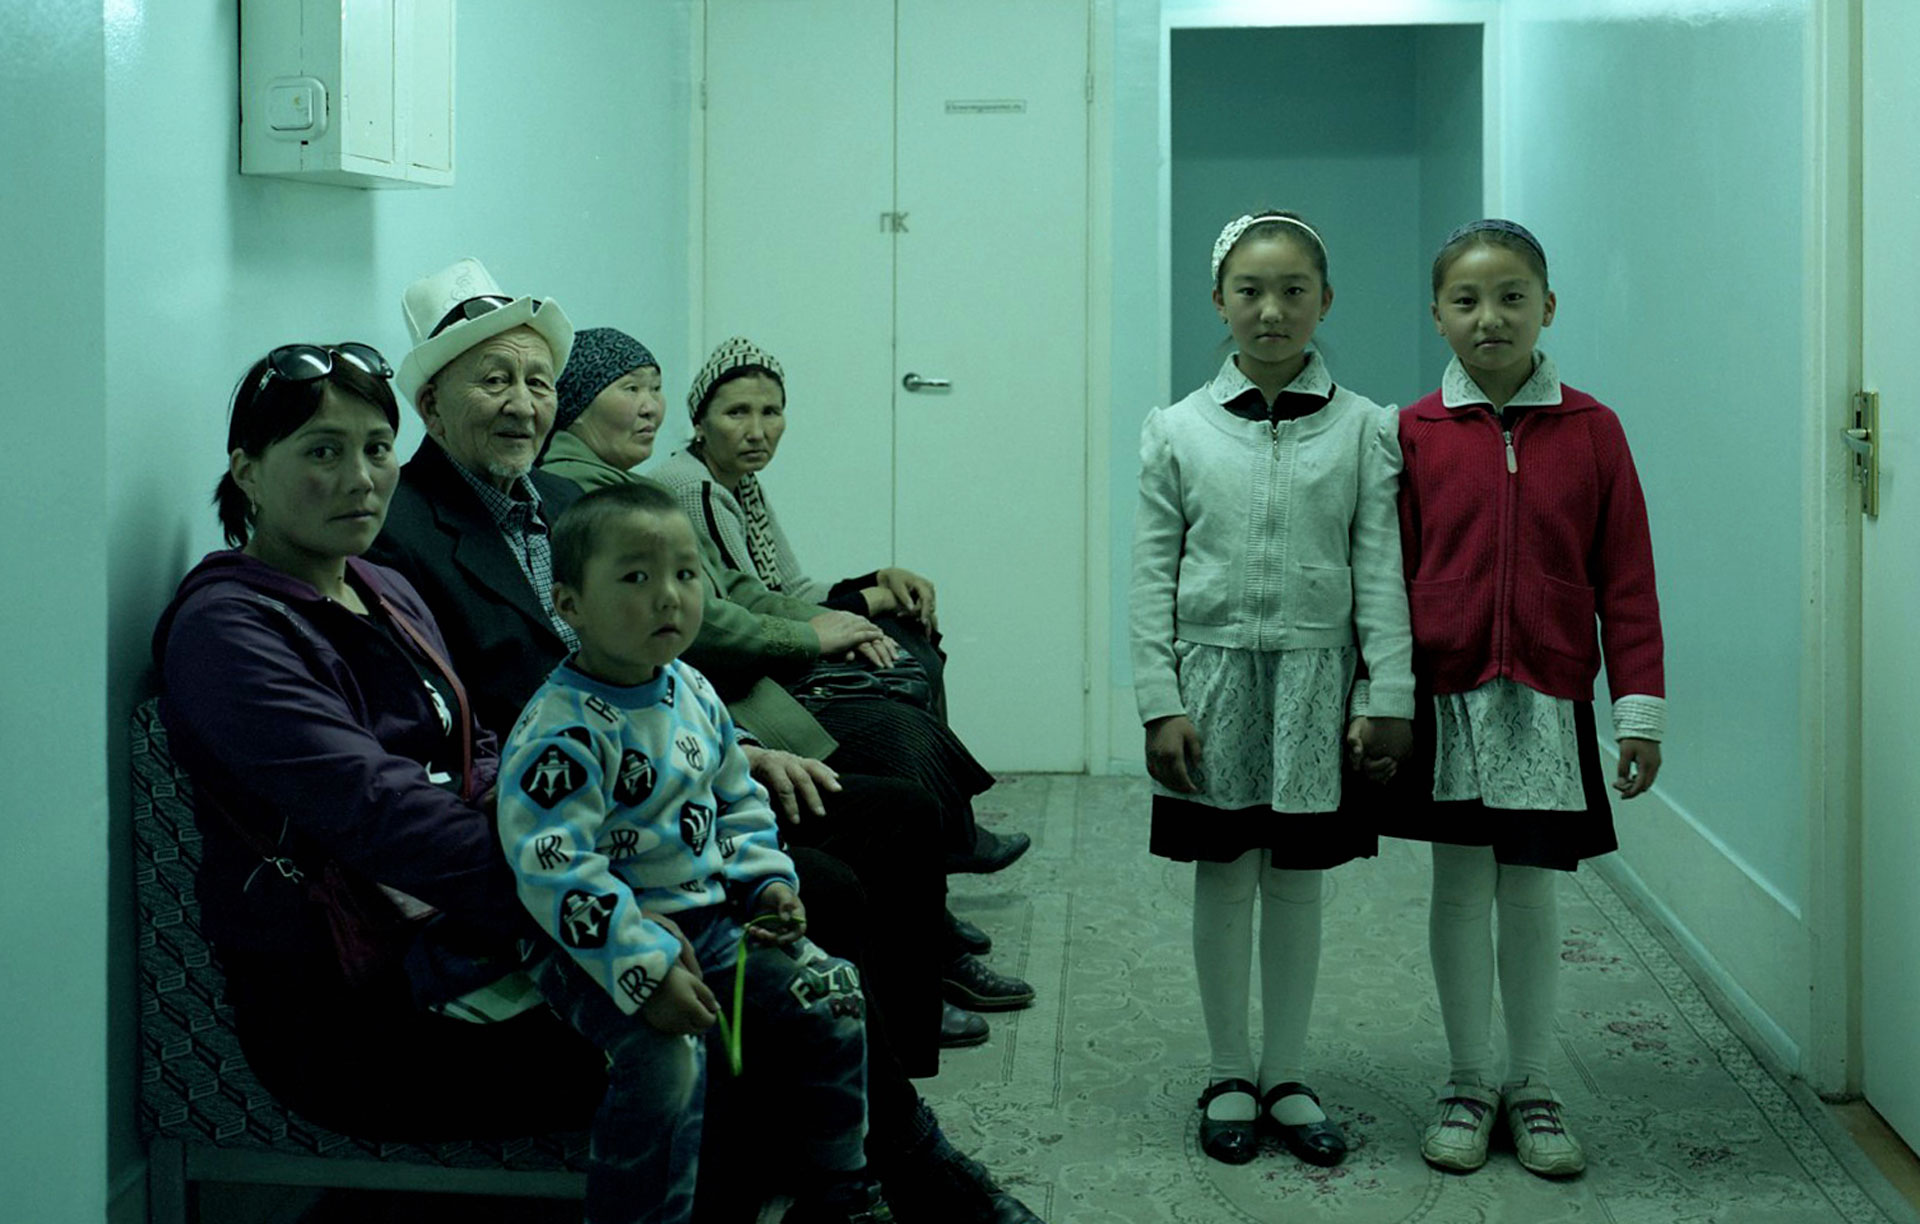 This eerie scene from a Kyrgyz sanatorium conjures the disquiet of The Shining 